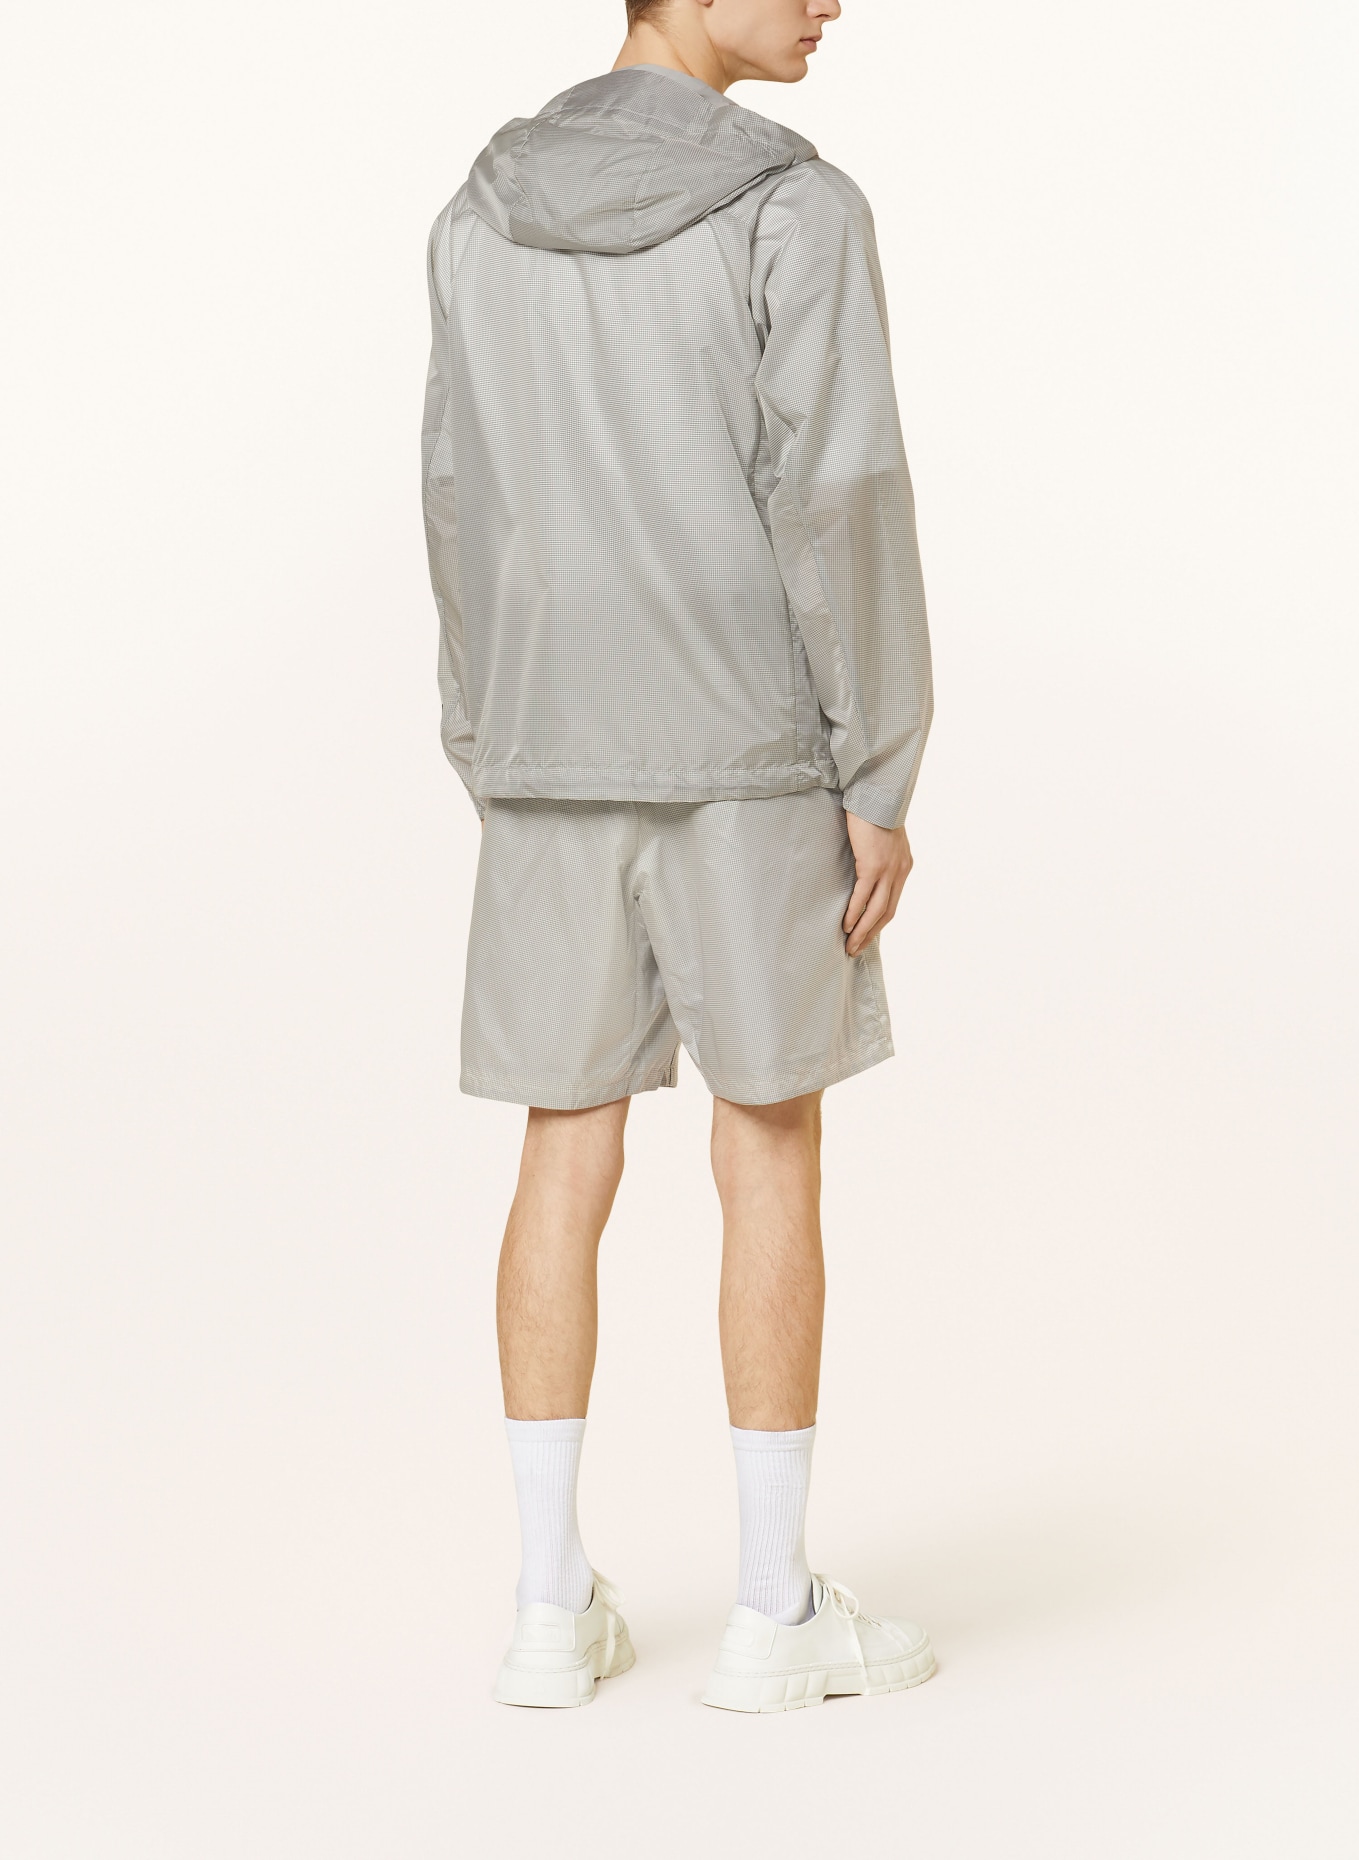 NORSE PROJECTS Shorts PASMO, Color: LIGHT GRAY/ BLUE GRAY (Image 3)